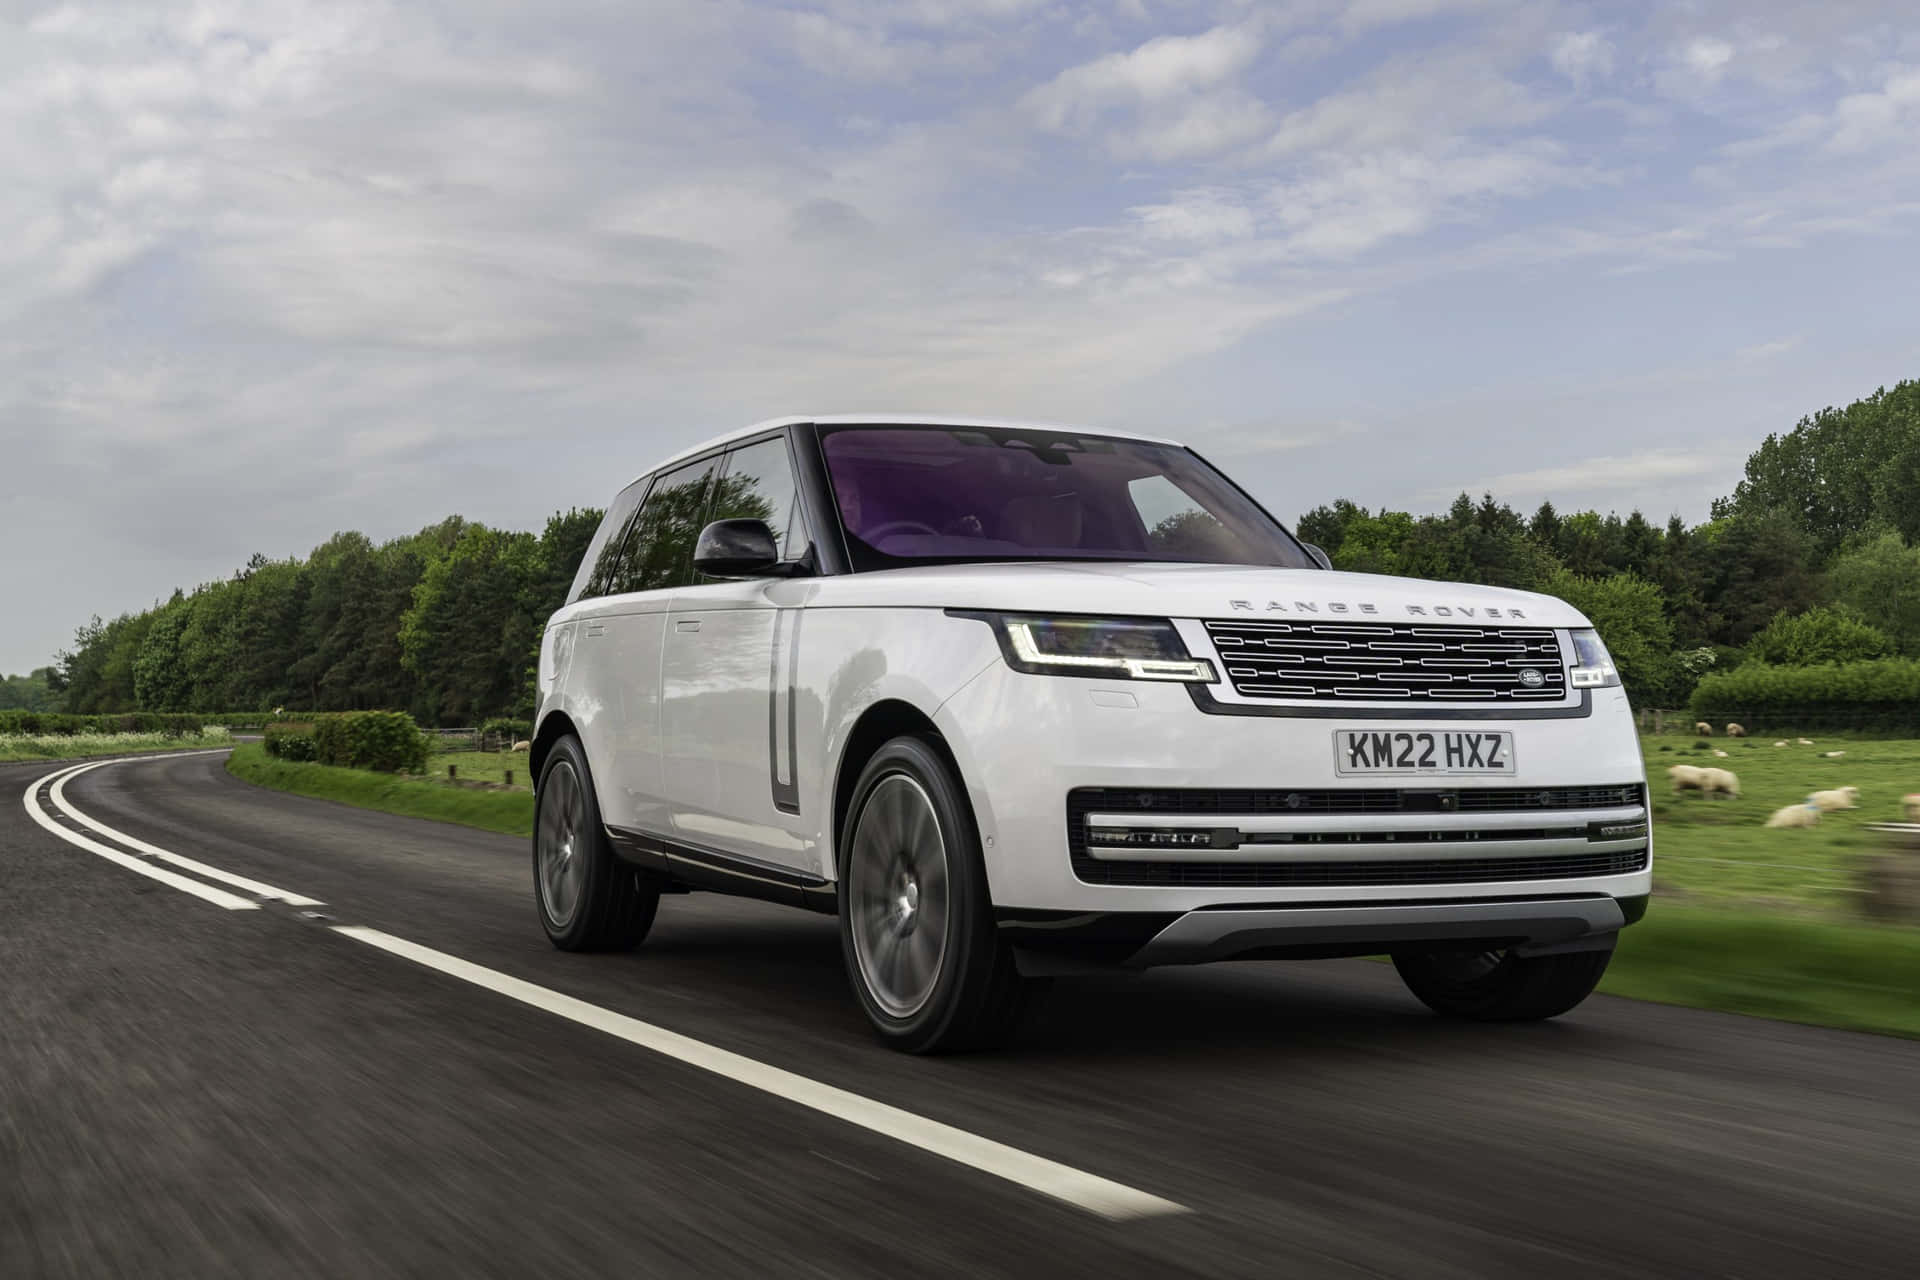 The White Range Rover Is Driving Down A Country Road